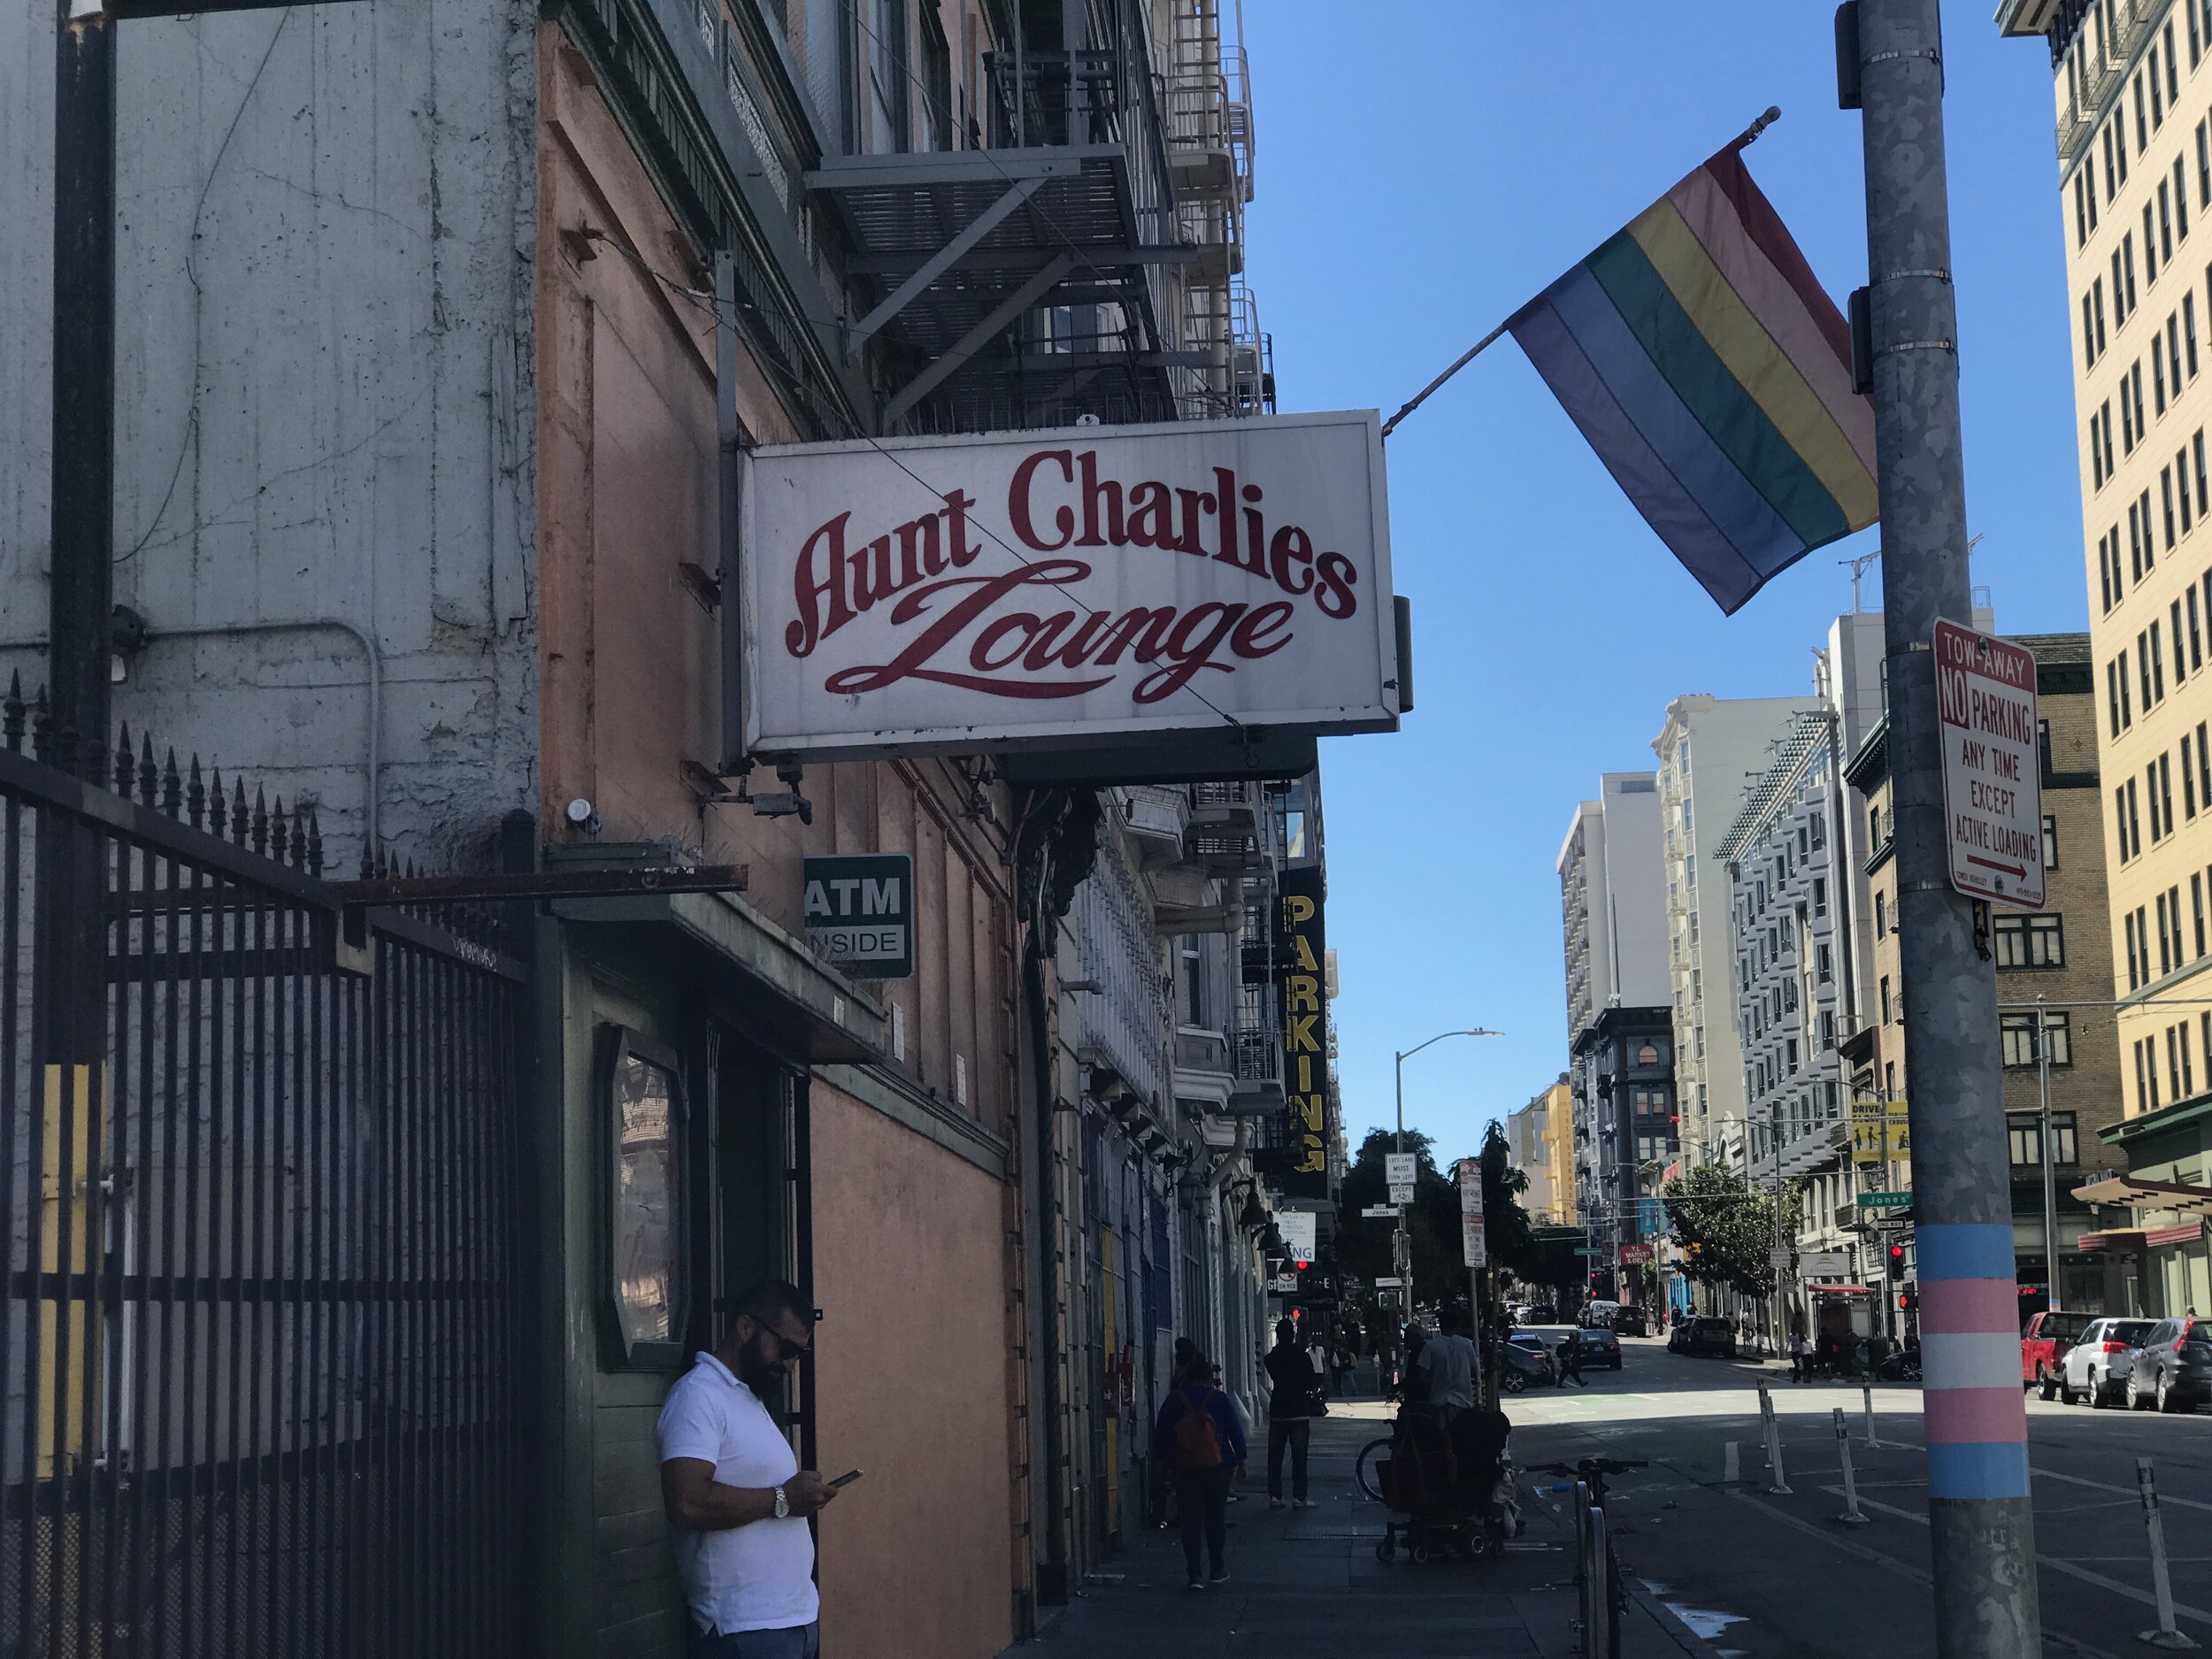  Noted for its weekend drag shows, Aunt Charley’s is the last surviving gay bar in the Tenderloin. 